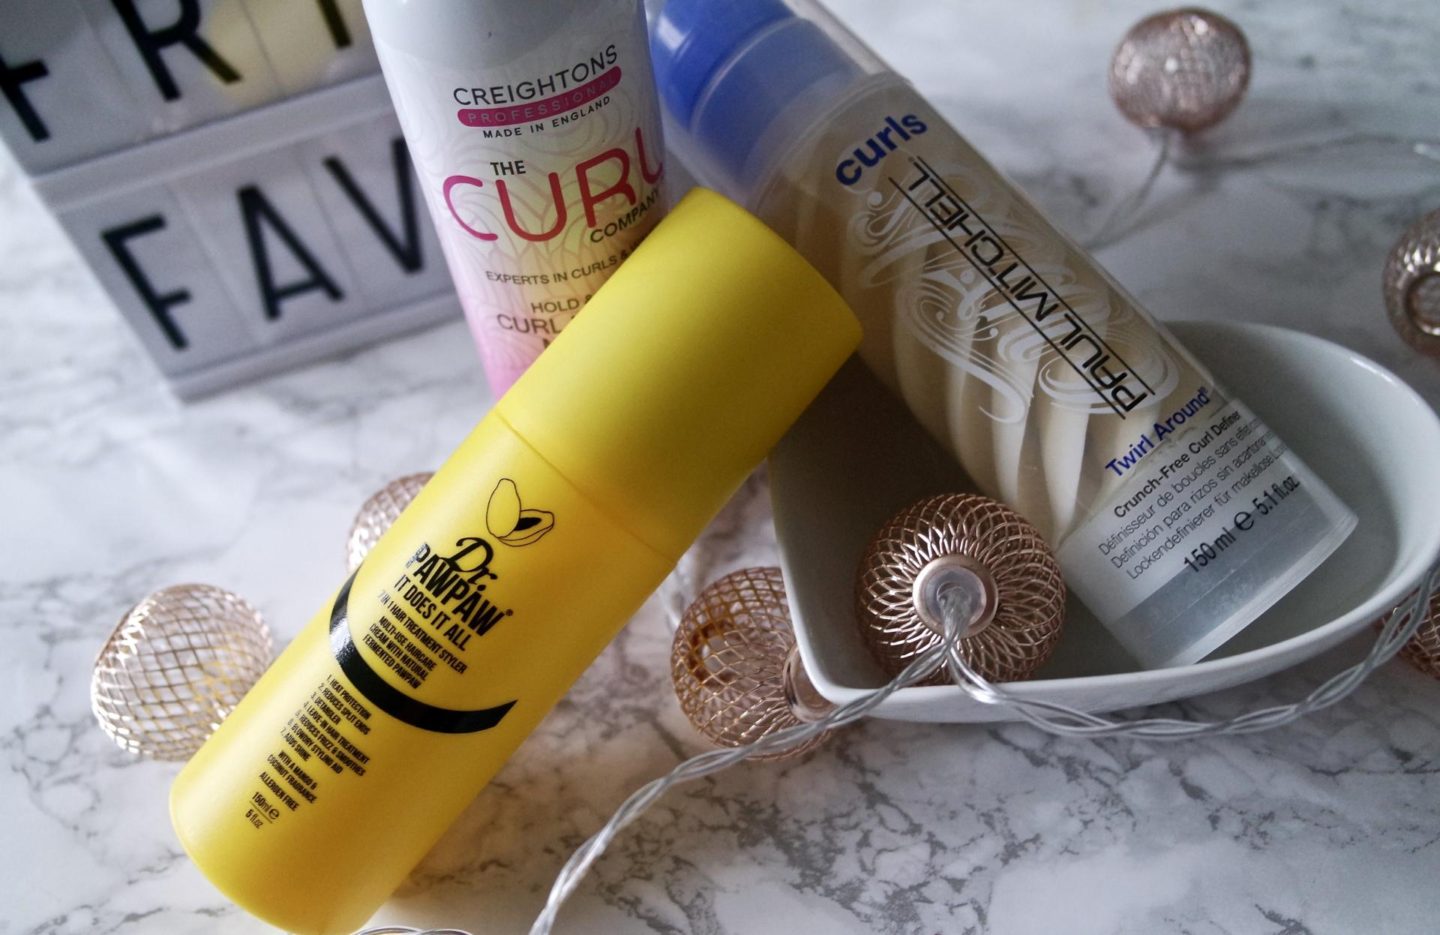 Current Haircare Favourites